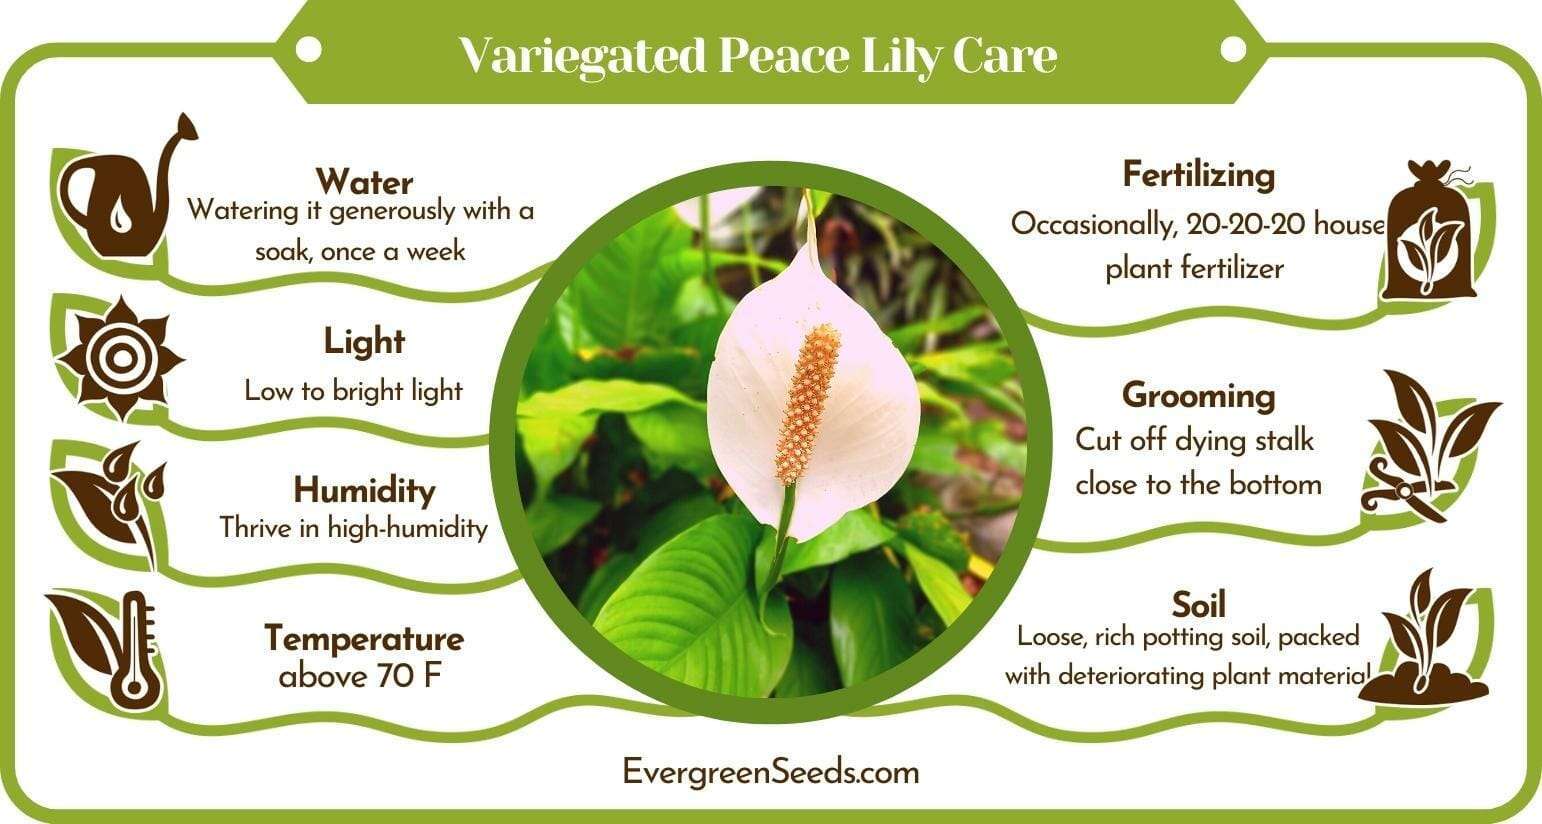 Variegated Peace Lily Care Infographic